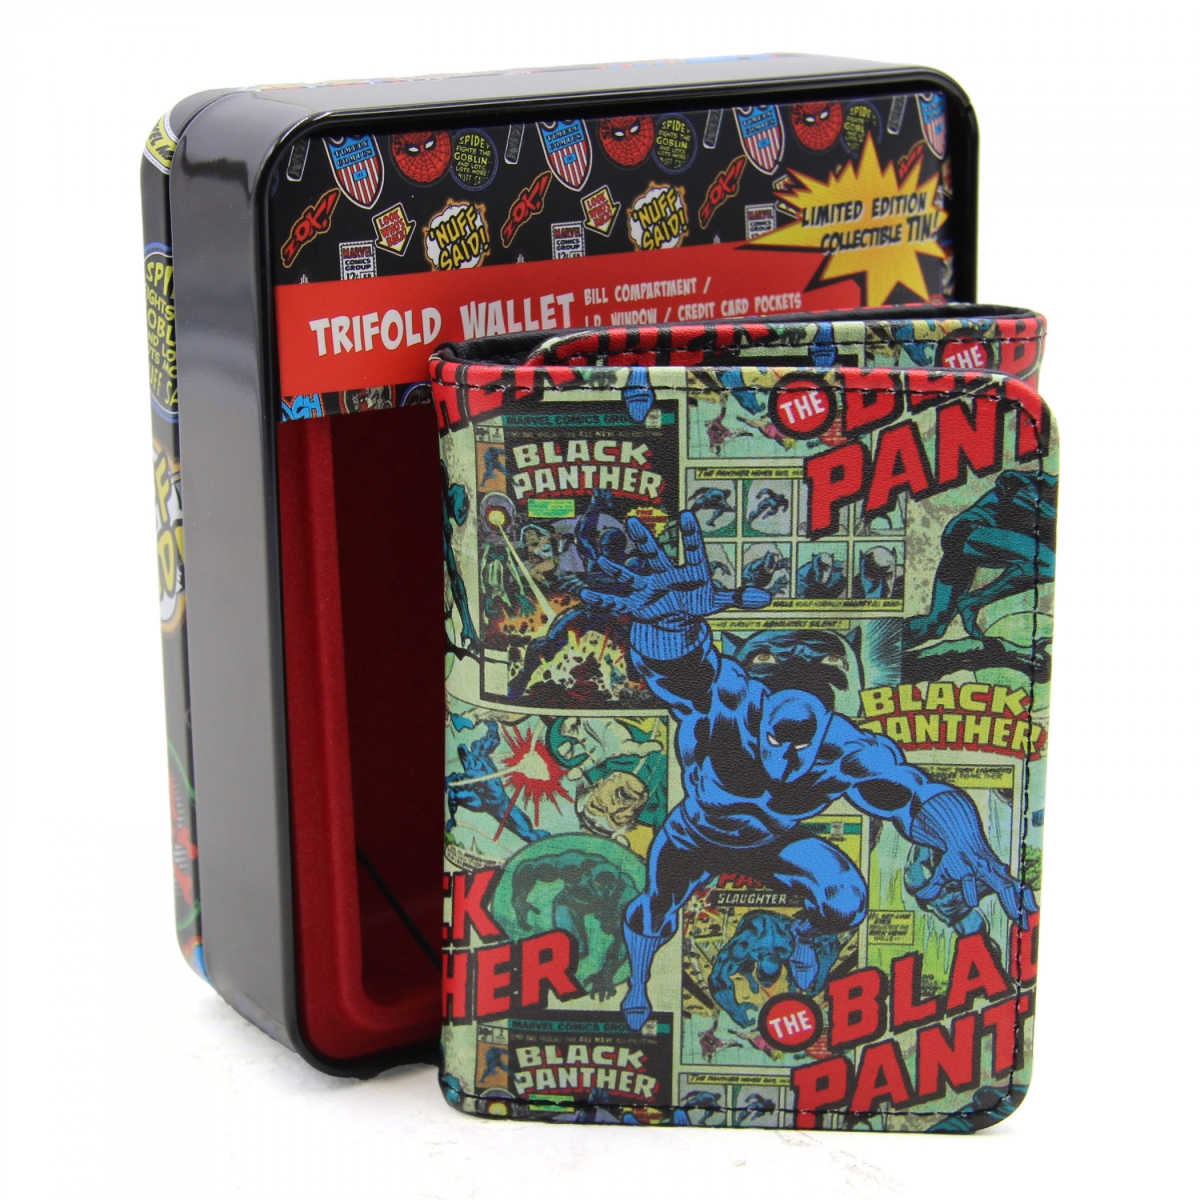 Picture of Black Panther 870089 Black Panther Pounce Comic Covers Trifold Wallet in Collectors Tin